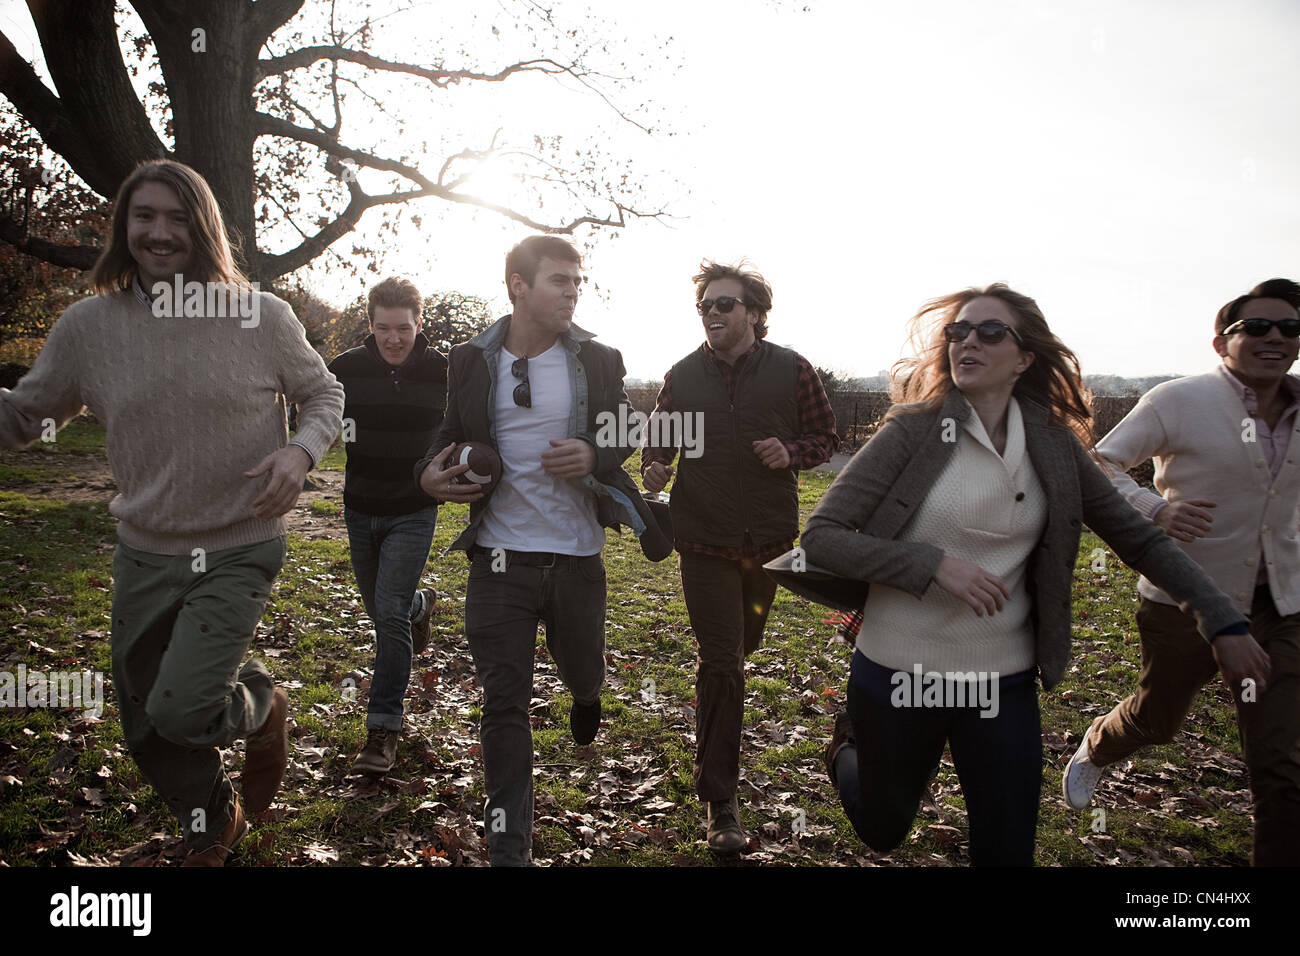 Group of friends running in park Stock Photo